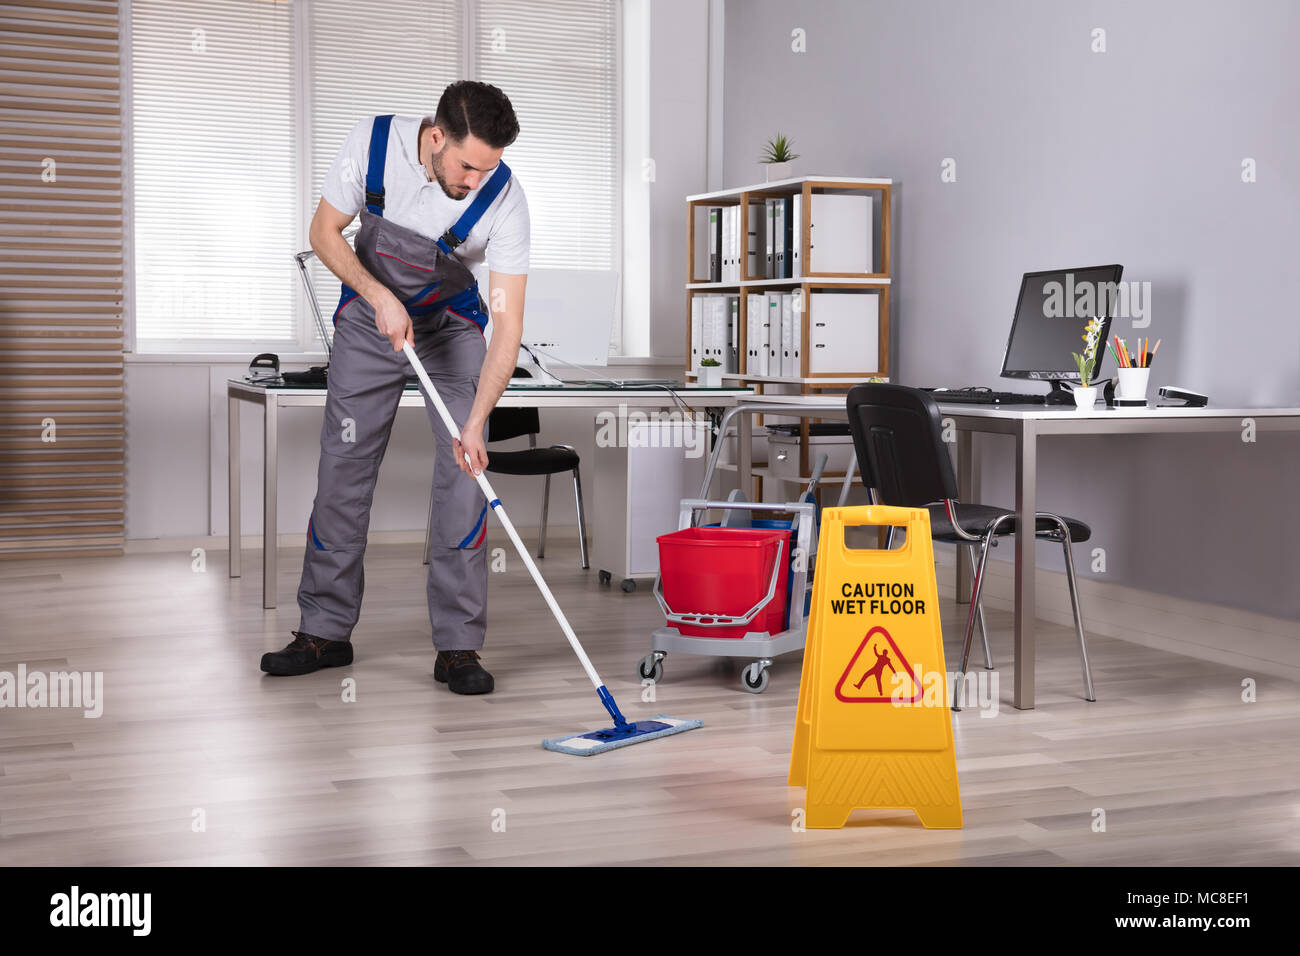 Man Cleaning Office With Mop Near Caution Wet Floor Sign Stock